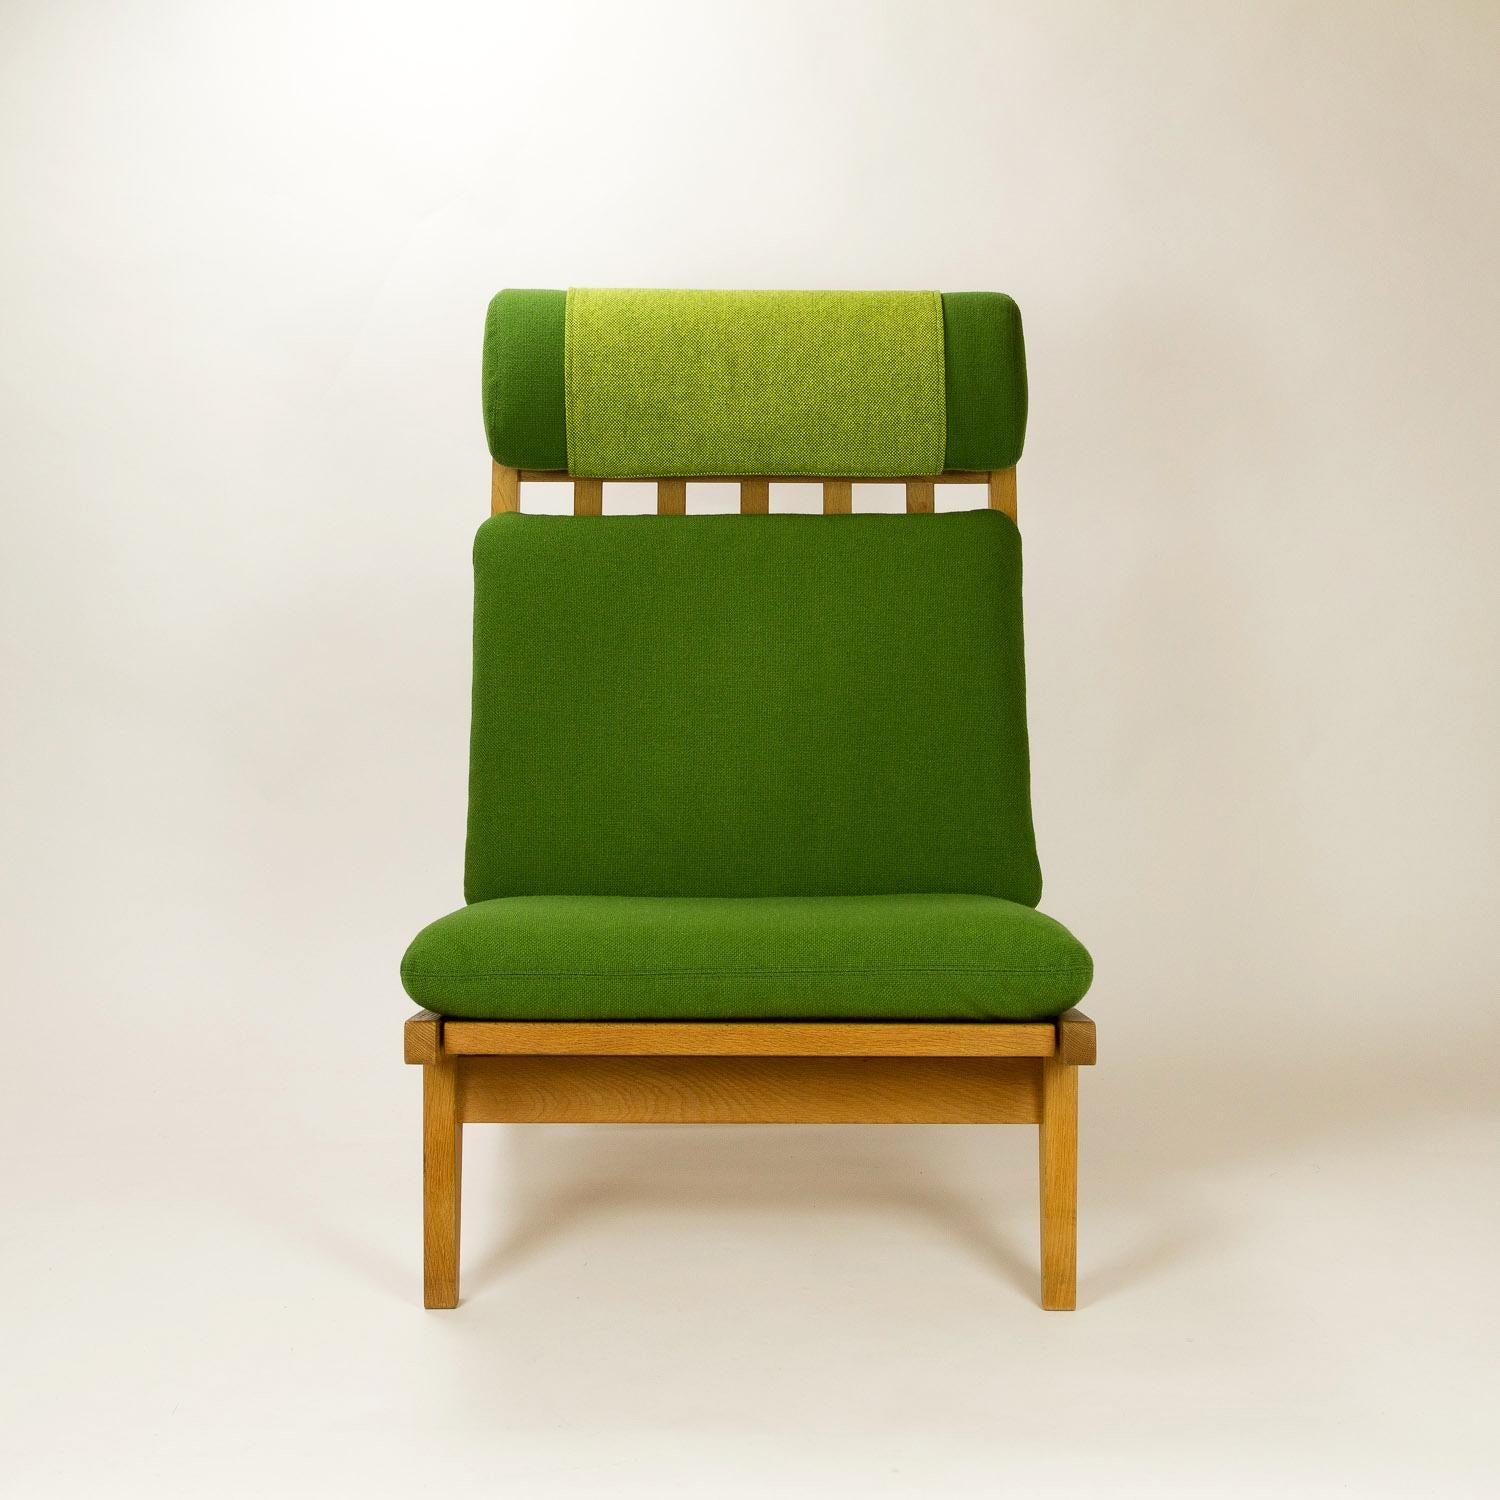 GE 375 side chair in oak and new Kvadrat Hallingdal 65 contrasting green upholstery. New Pirelli webbing under the seats. Hallingdal 65 color references are 960 and 980. Please contact us if you would like to discuss upholstery options.